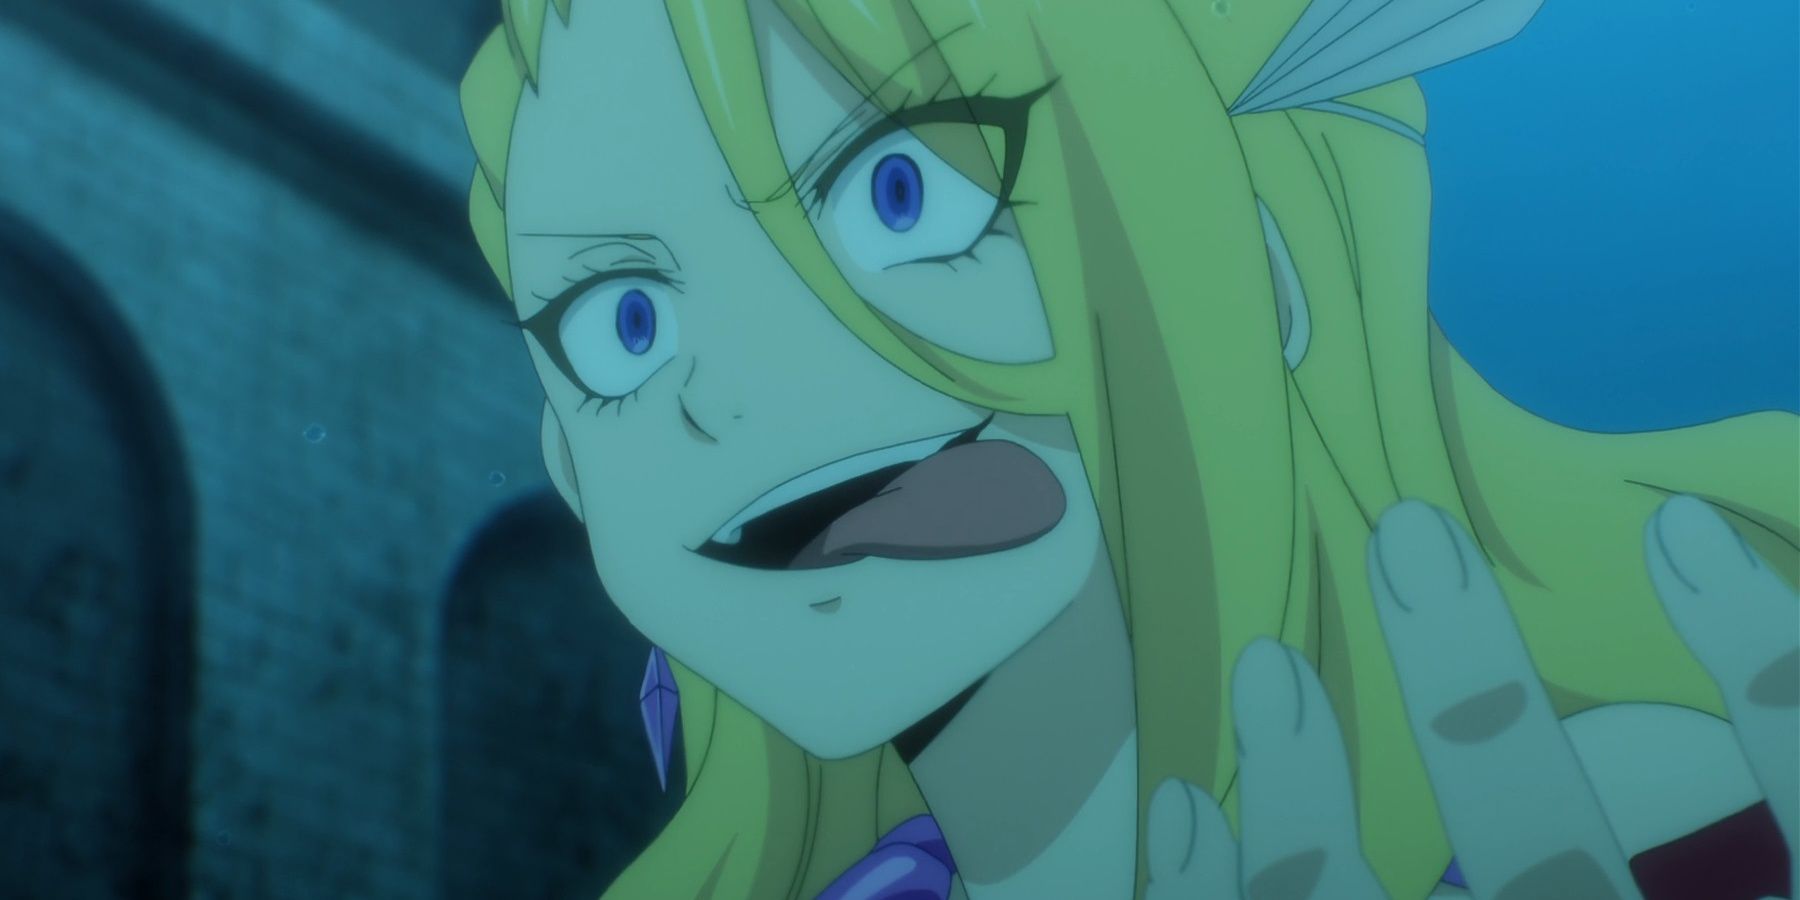 Kiria licks her lips while underwater in Fairy Tail: 100 Years Quest Episode 2